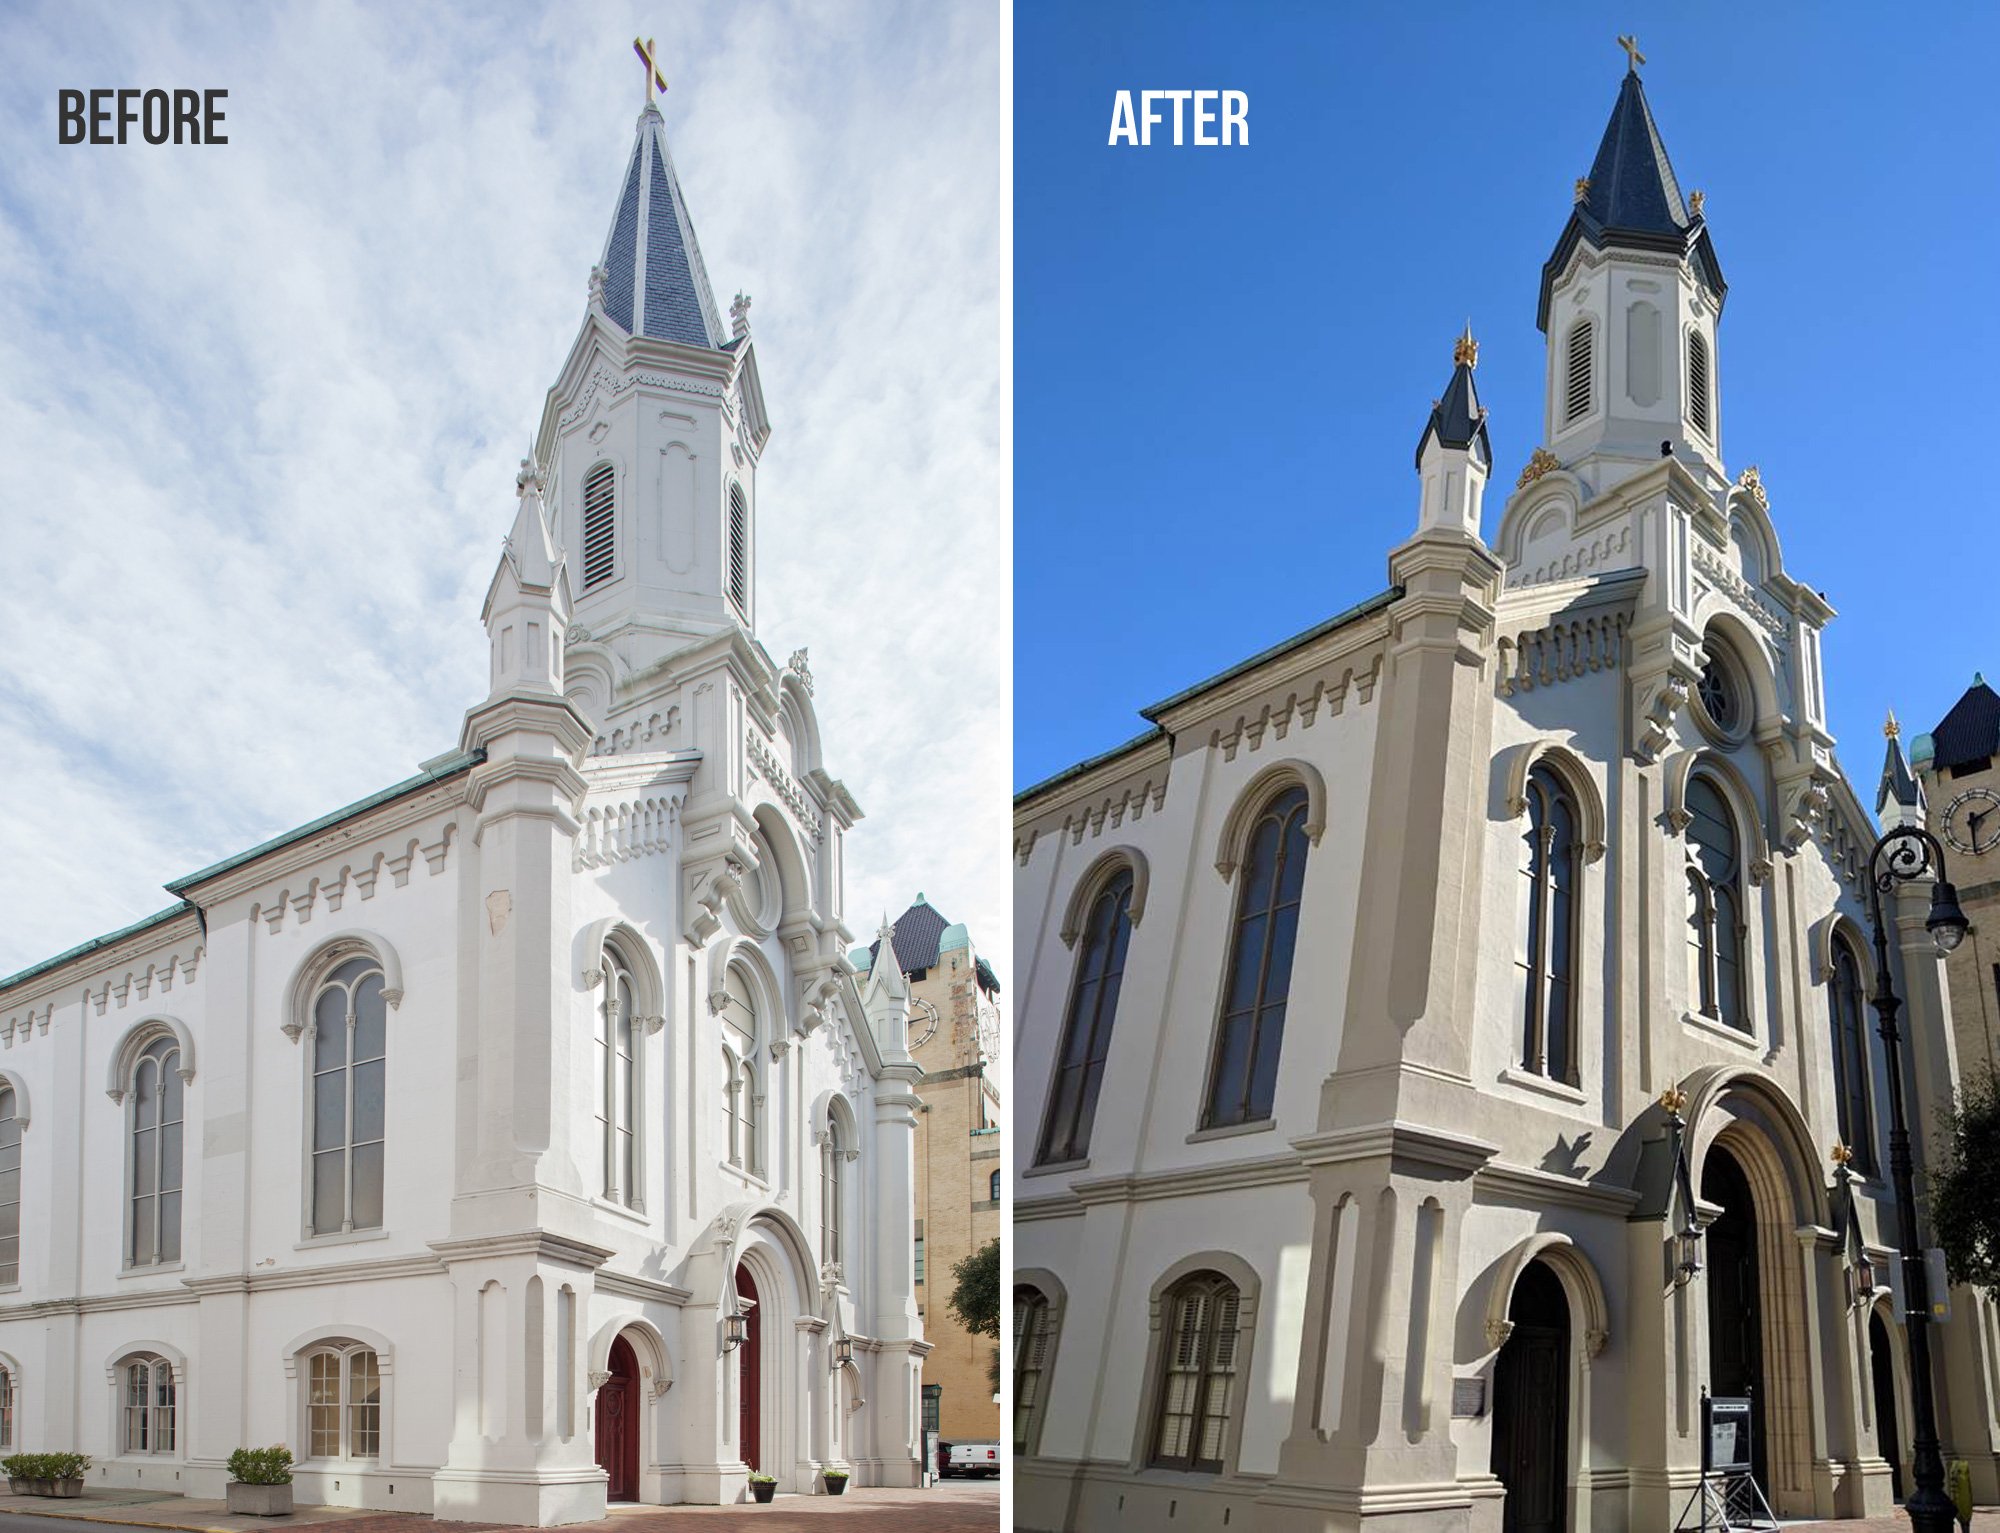 lutheran-before-after-1.jpg